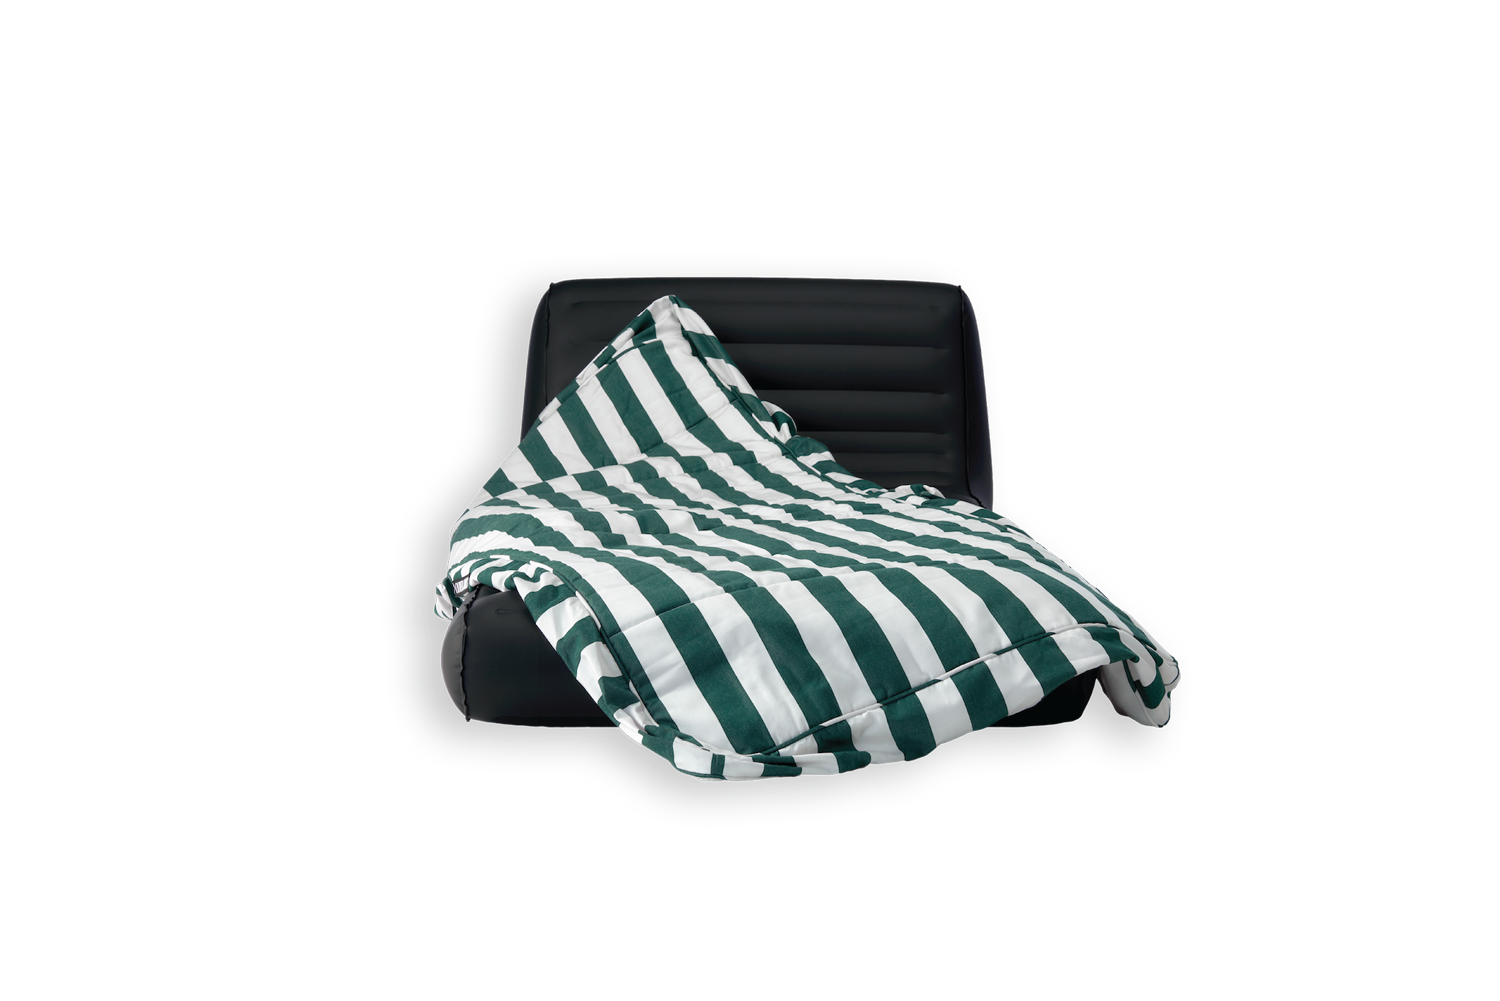 A green and white striped luxury pool float cover draped over a TPU inflatable core.